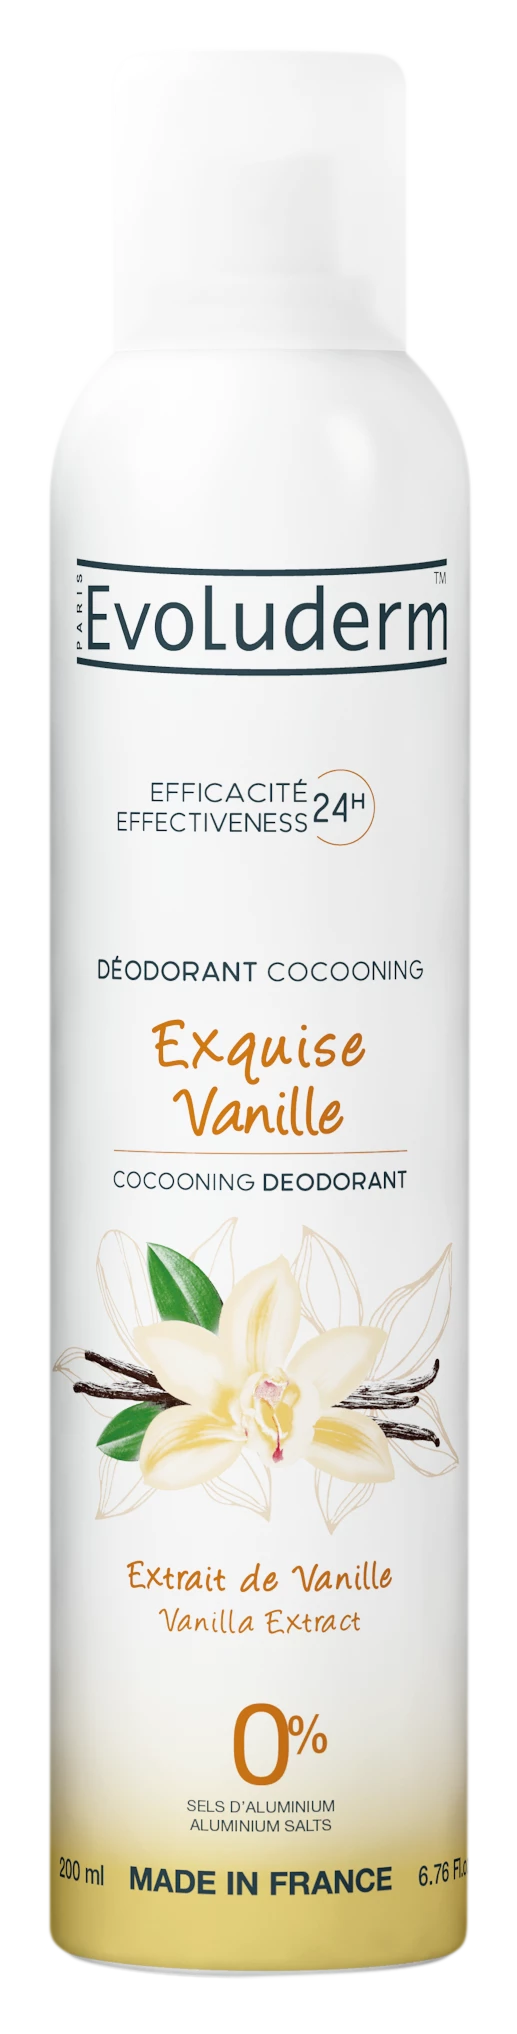 Déodorant Cocooning Exquise Vanille 200ml - Evoluderm